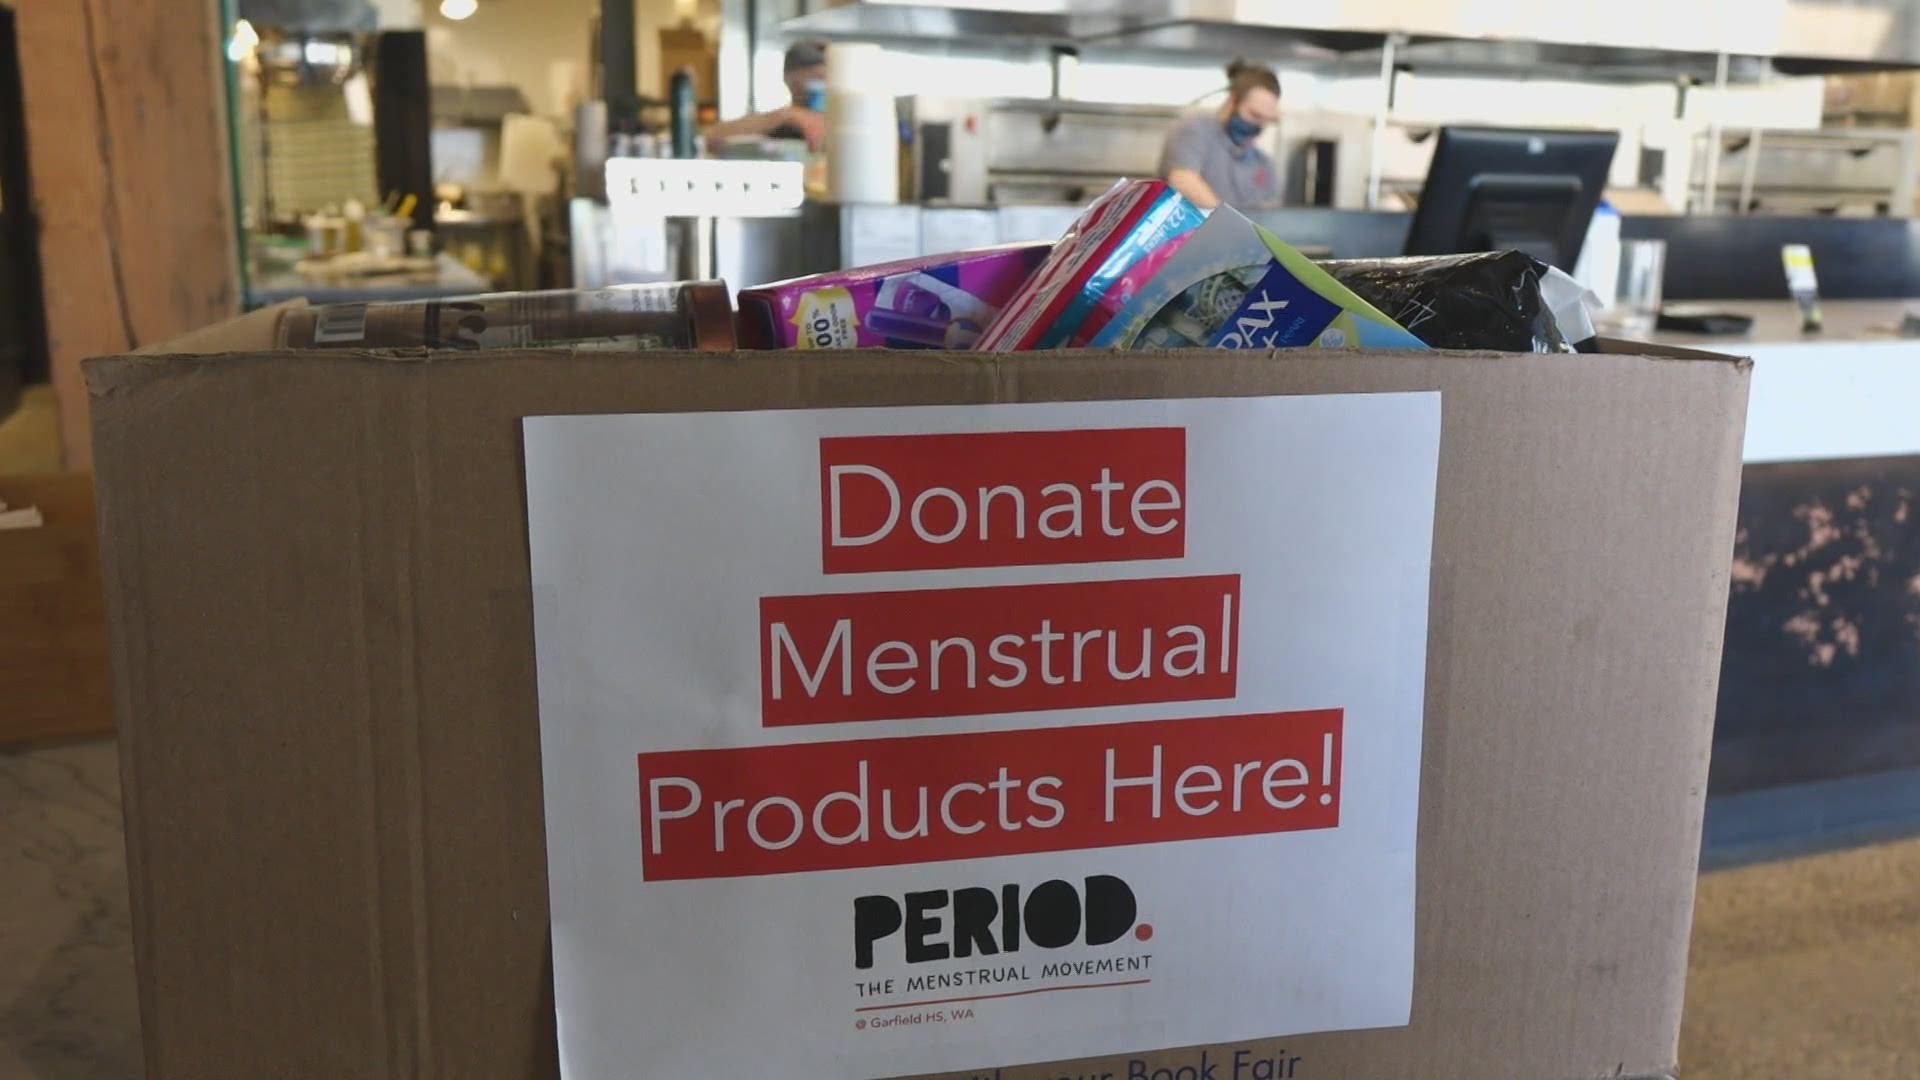 Two Seattle students are fighting period poverty with a drive to collect menstration products to help women everywhere. Period.